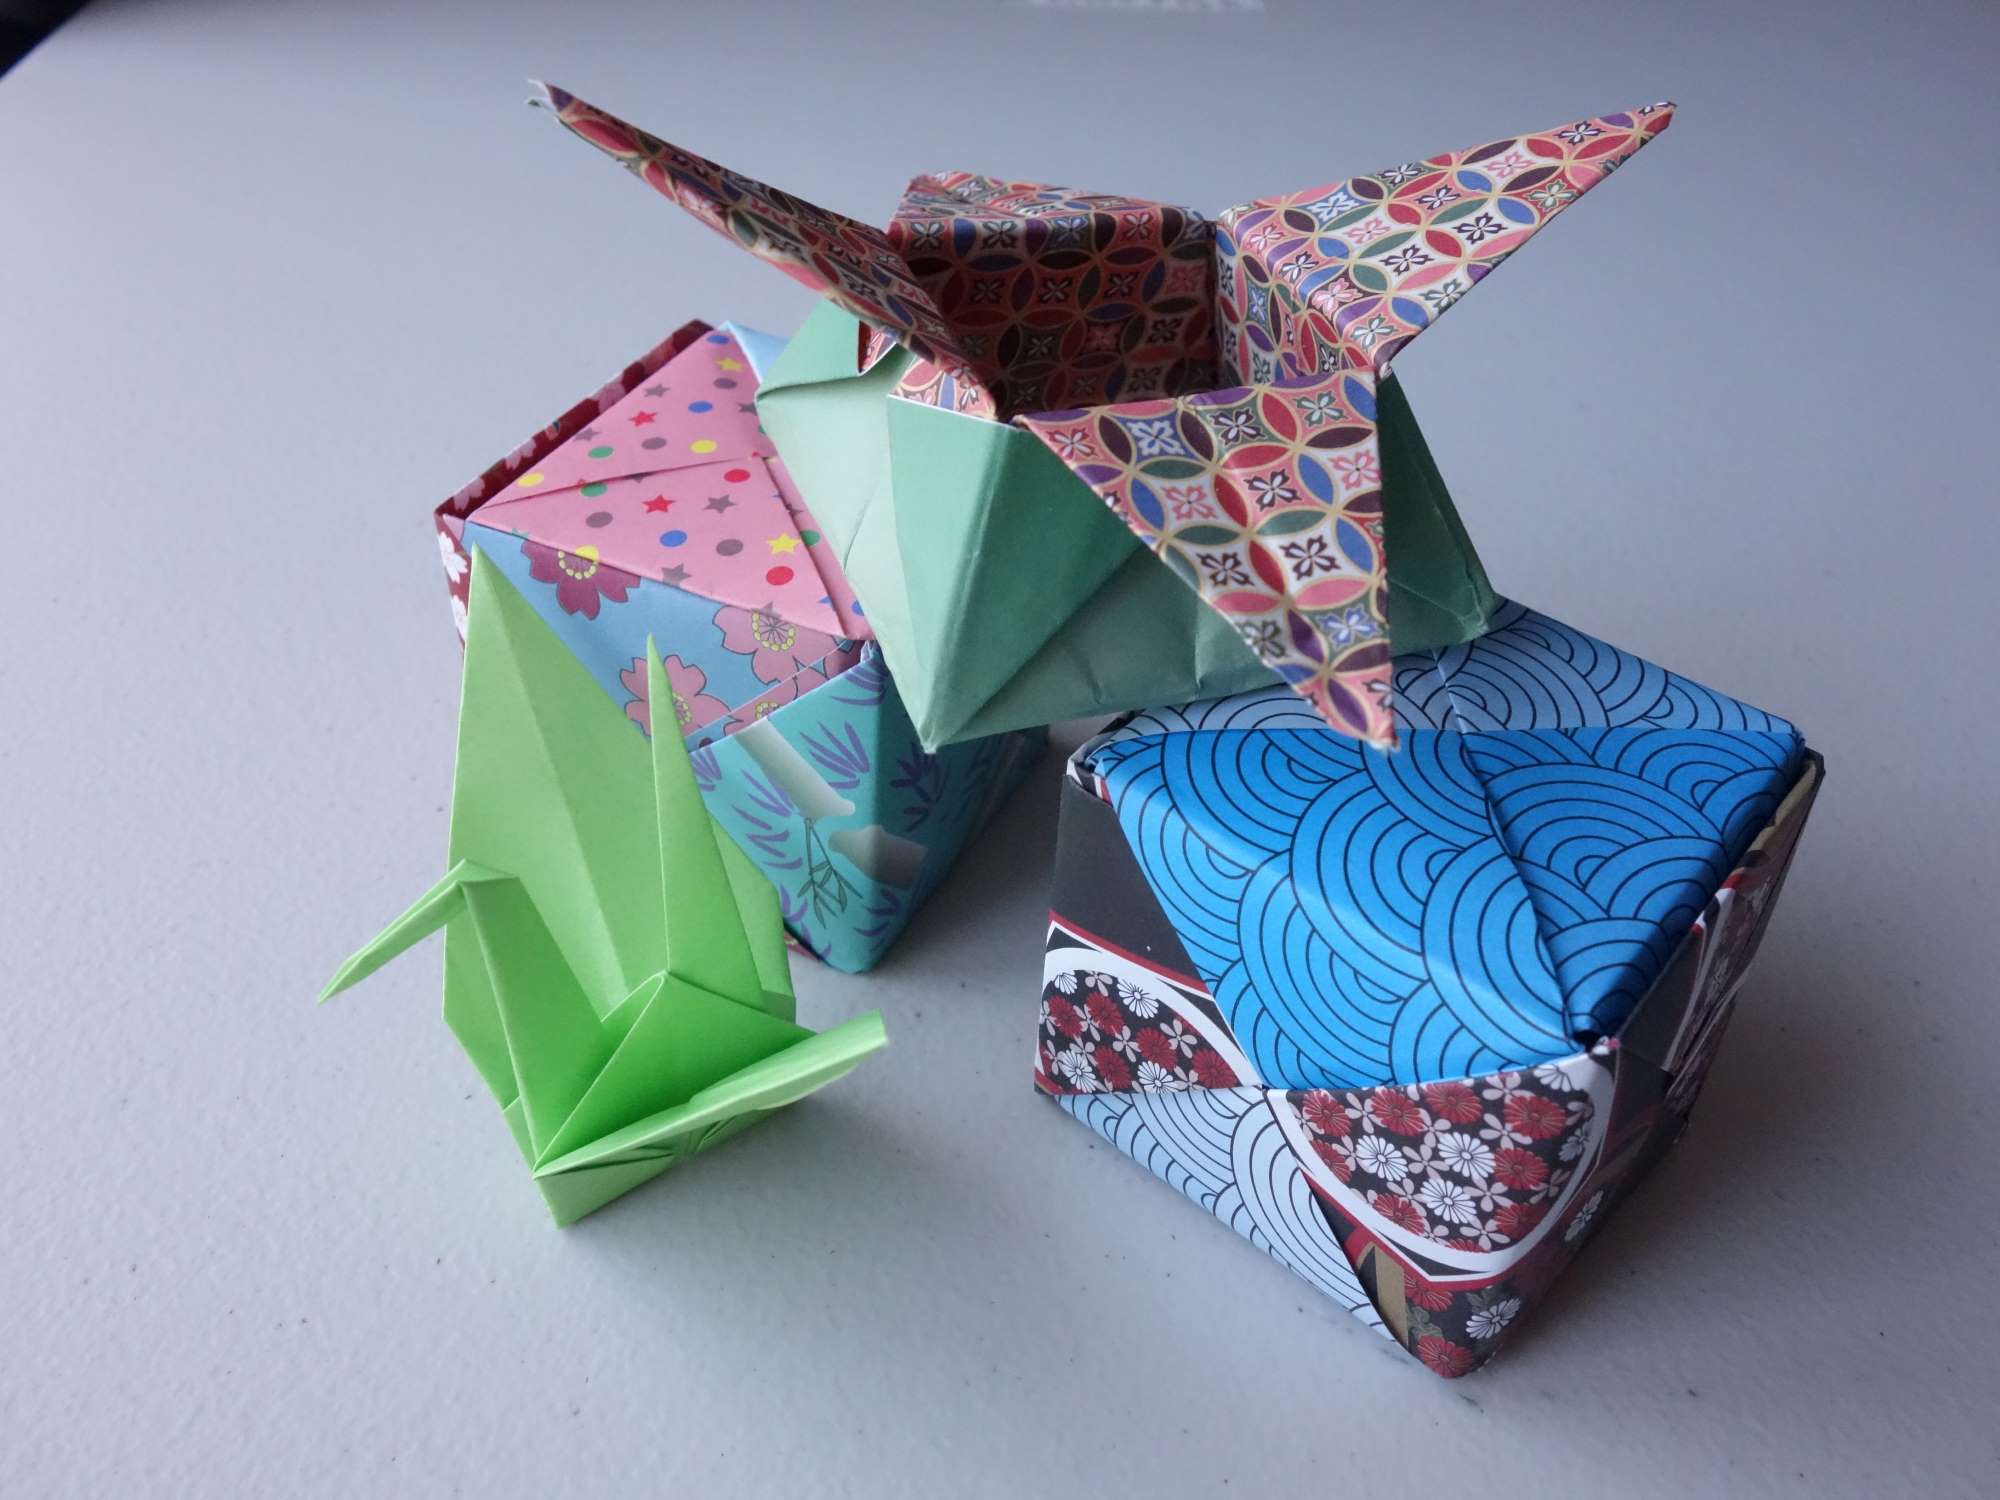 A set of Origami creations